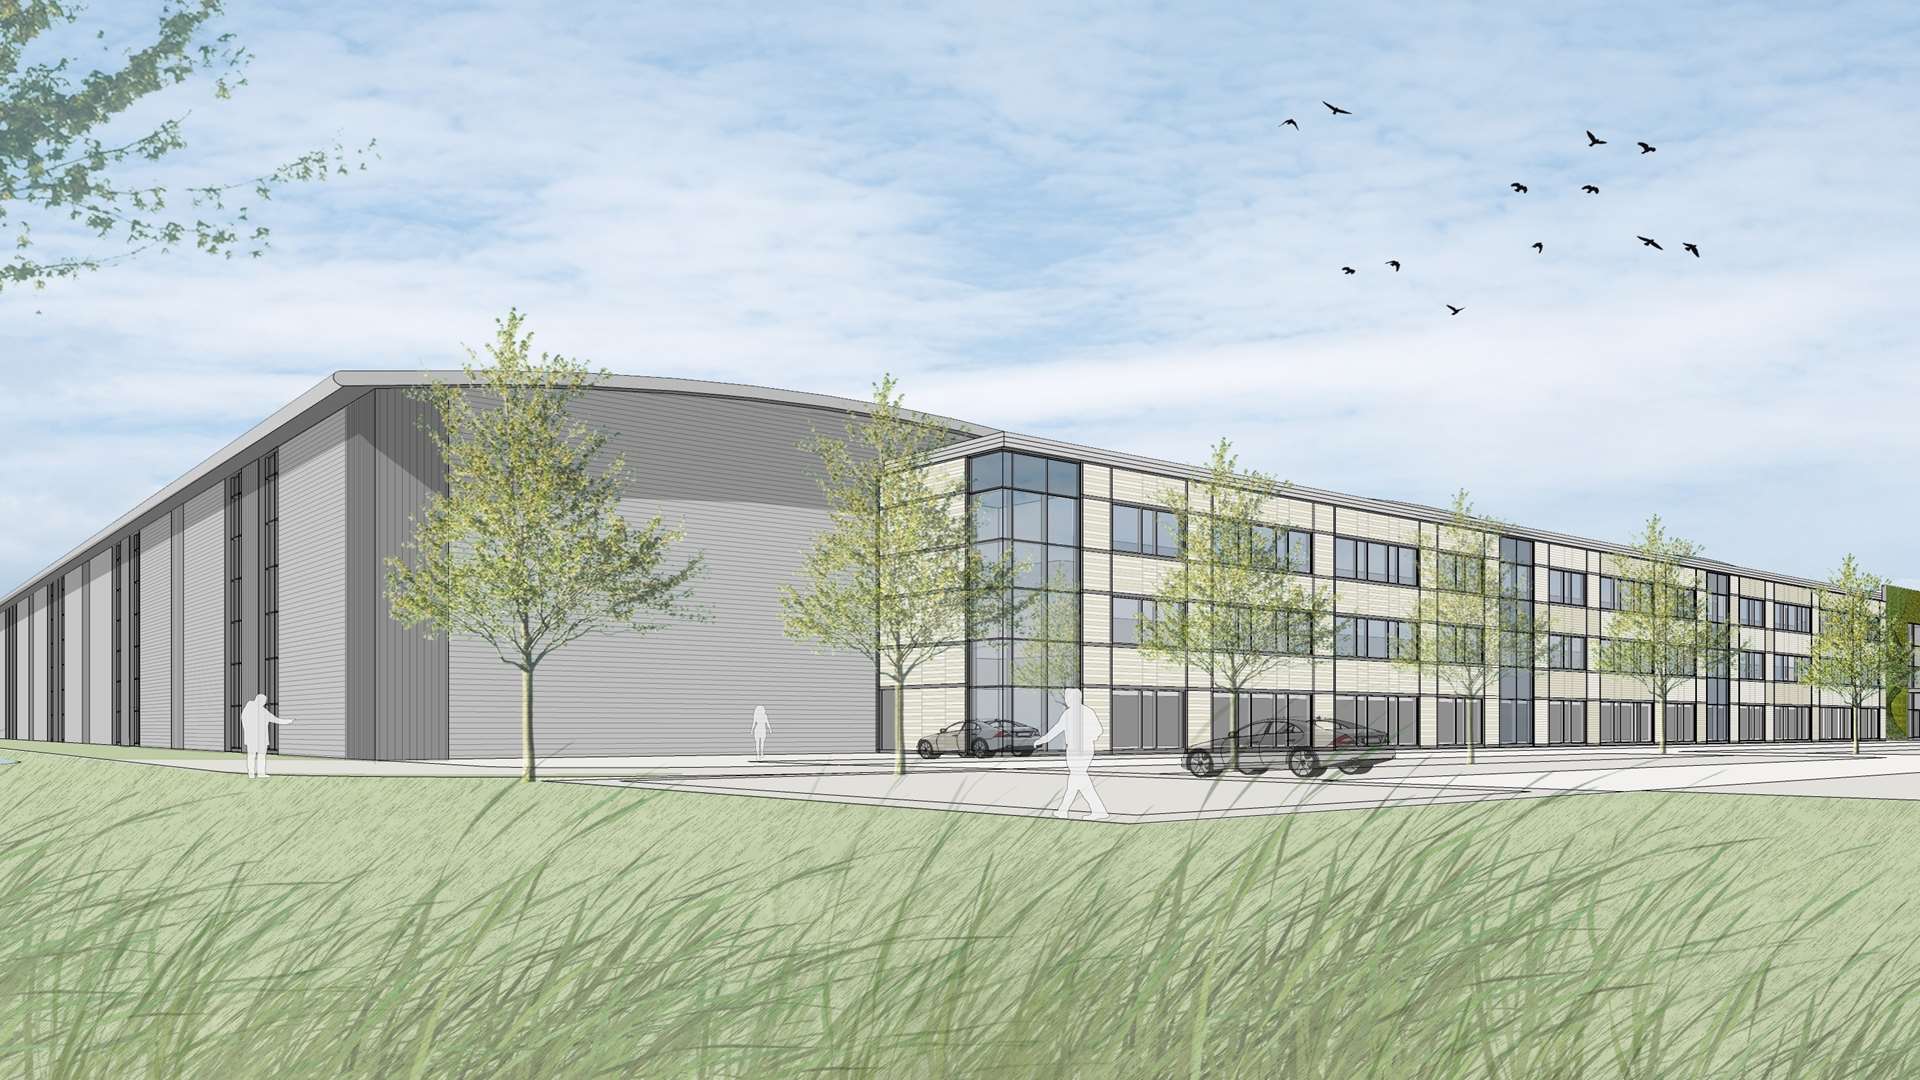 An artist's impression of one of the proposed new buildings at Waterside Park